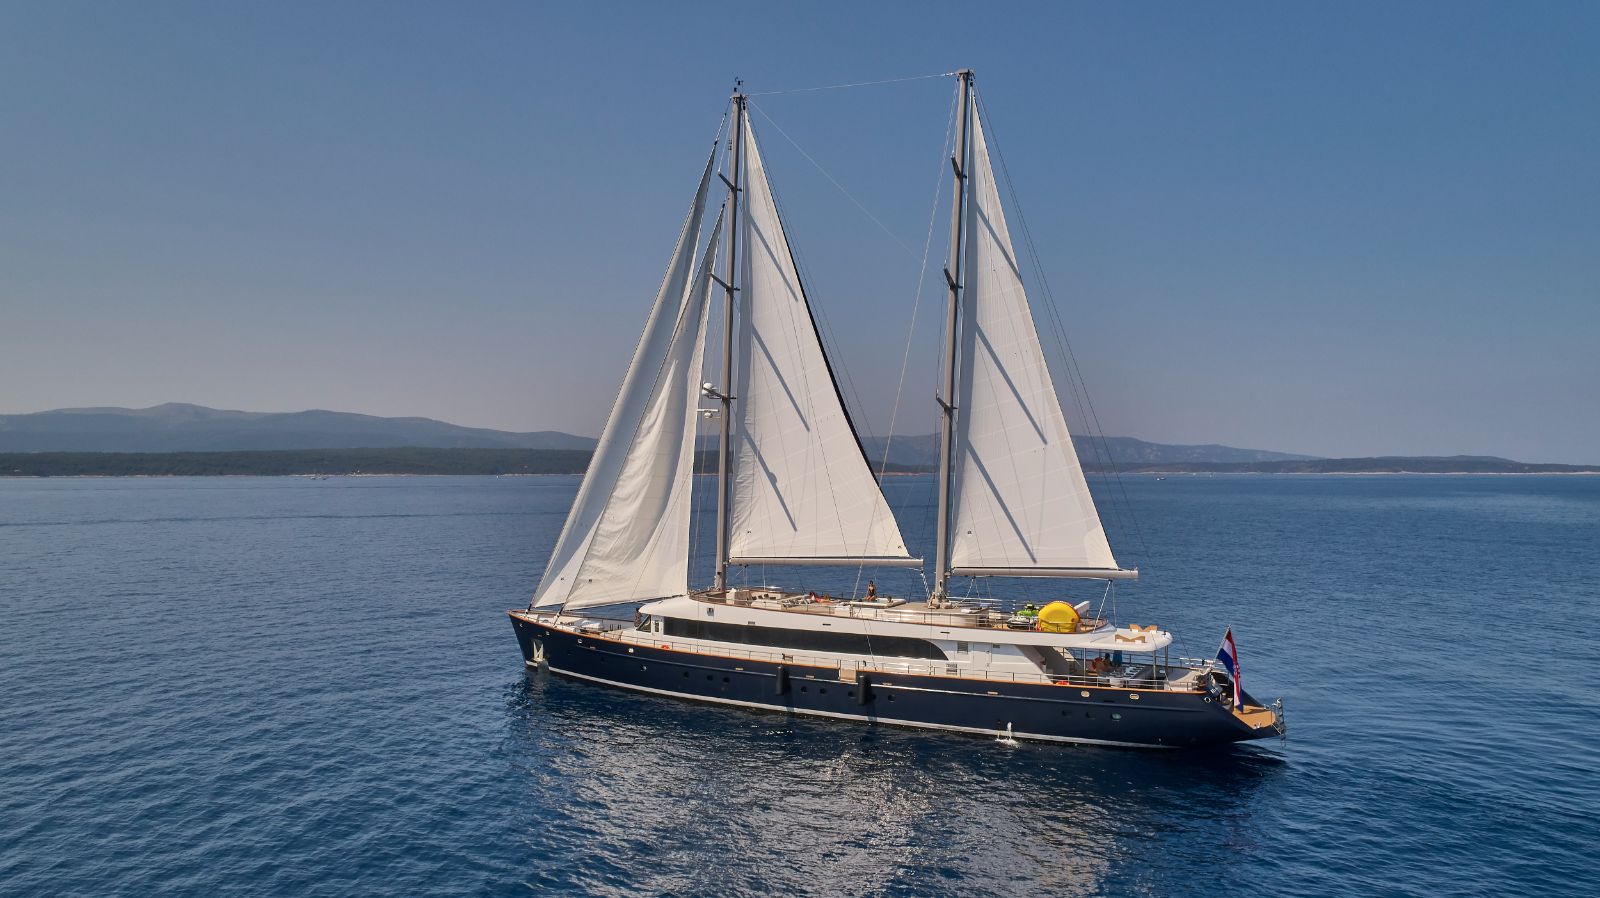 Exterior view of the Dalmatino gulet with sails up in Croatia